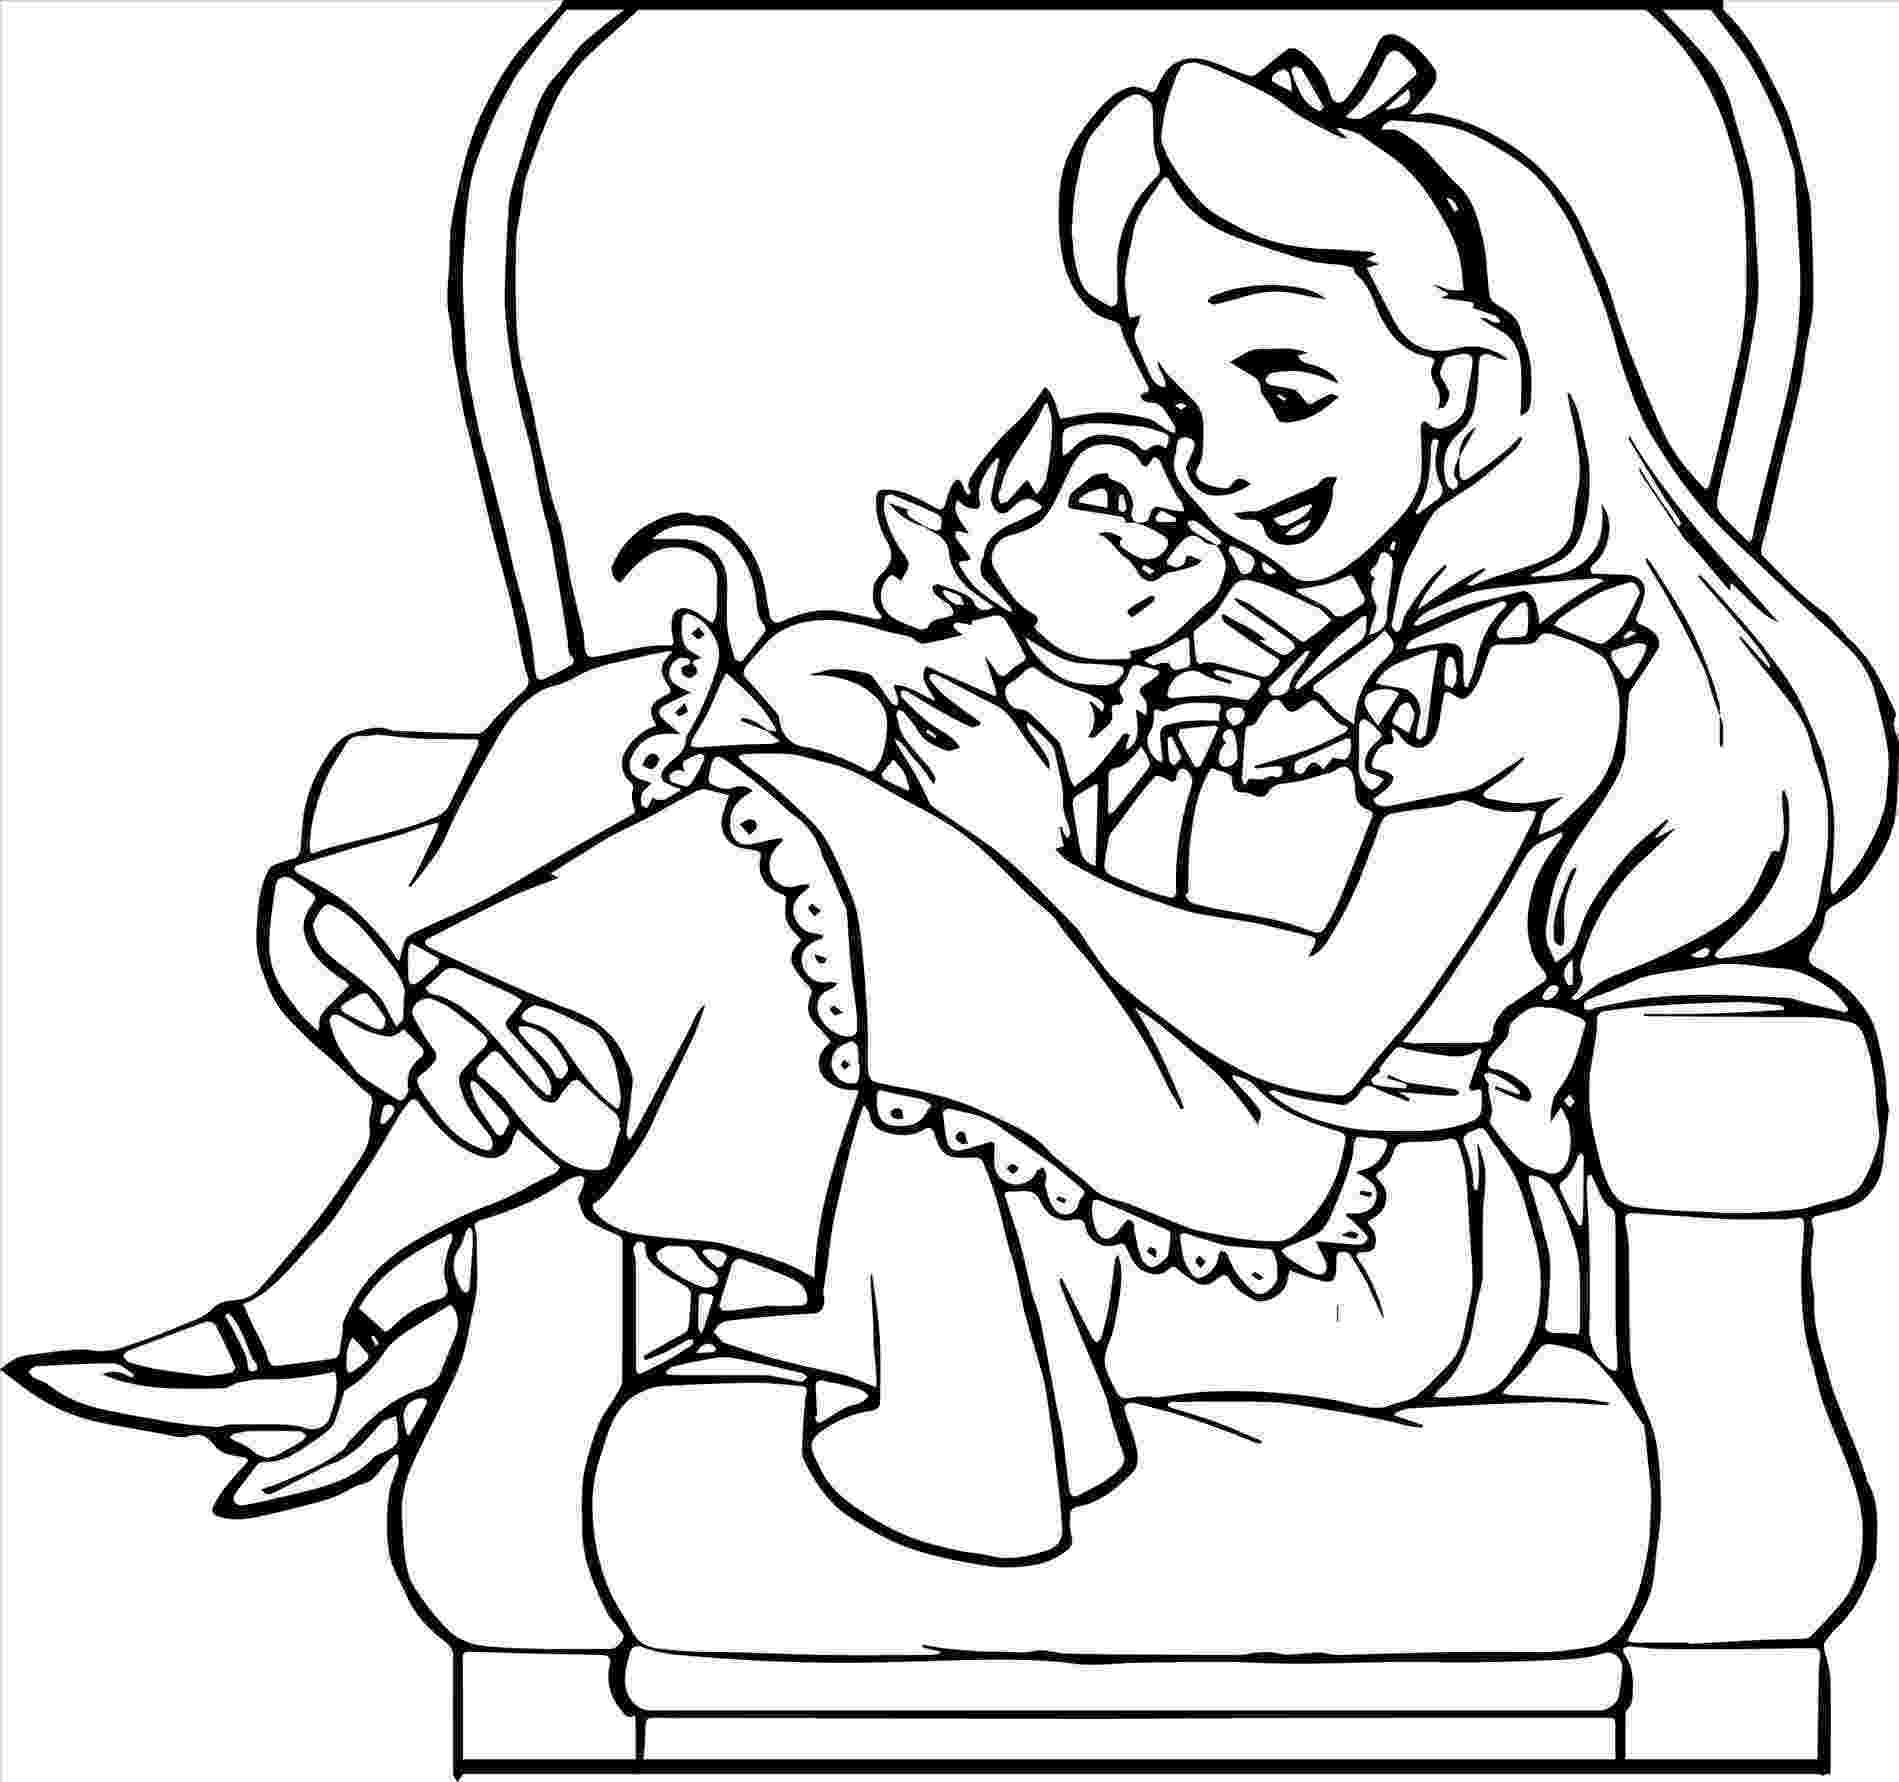 alice in wonderland coloring pages alice in wonderland coloring pages disneyclipscom wonderland coloring alice in pages 